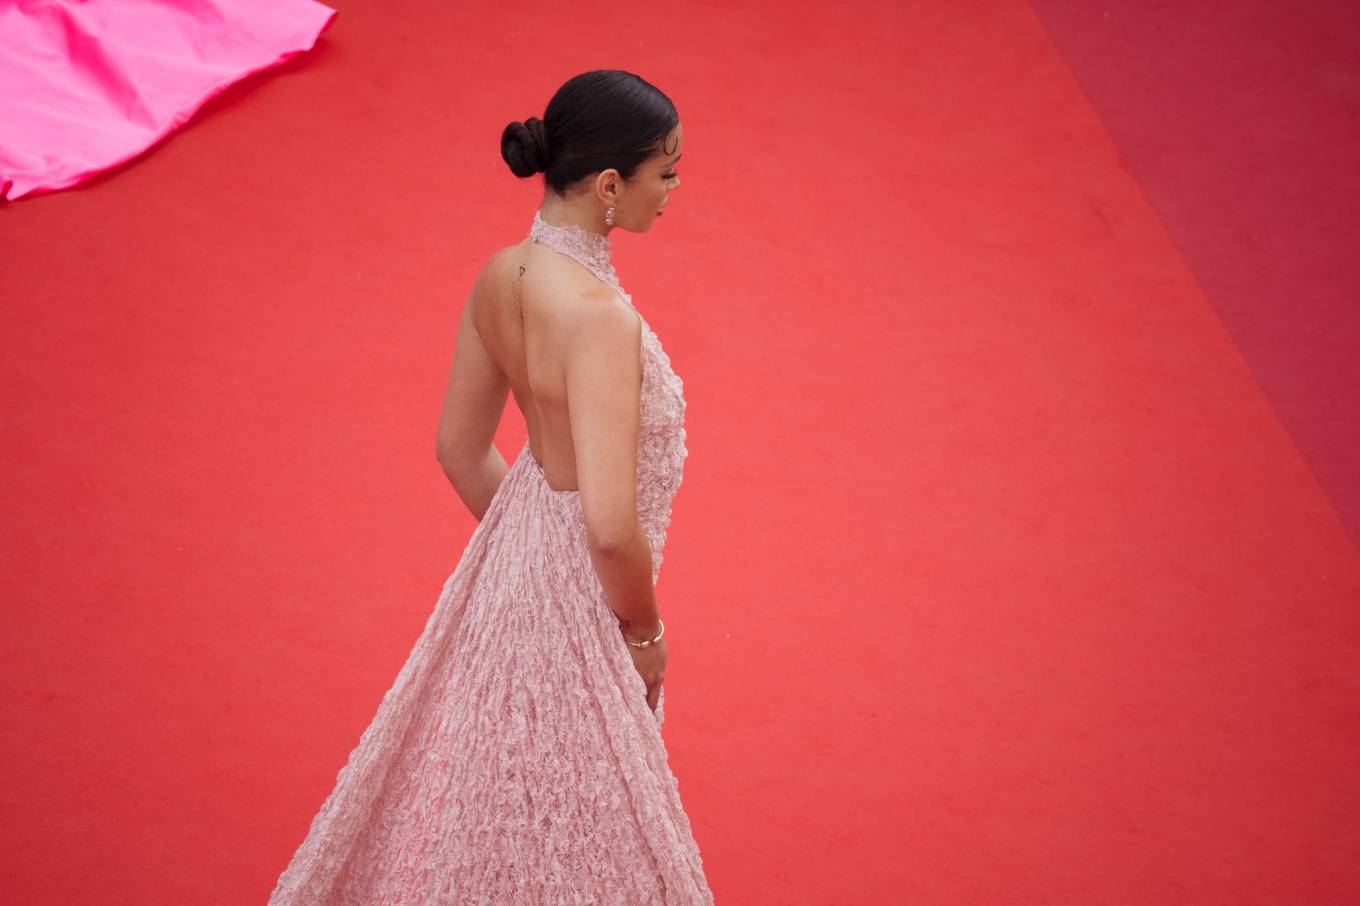 Cindy Kimberly 2022 : Cindy Kimberly – Screening of The Innocent in Cannes 2022-02